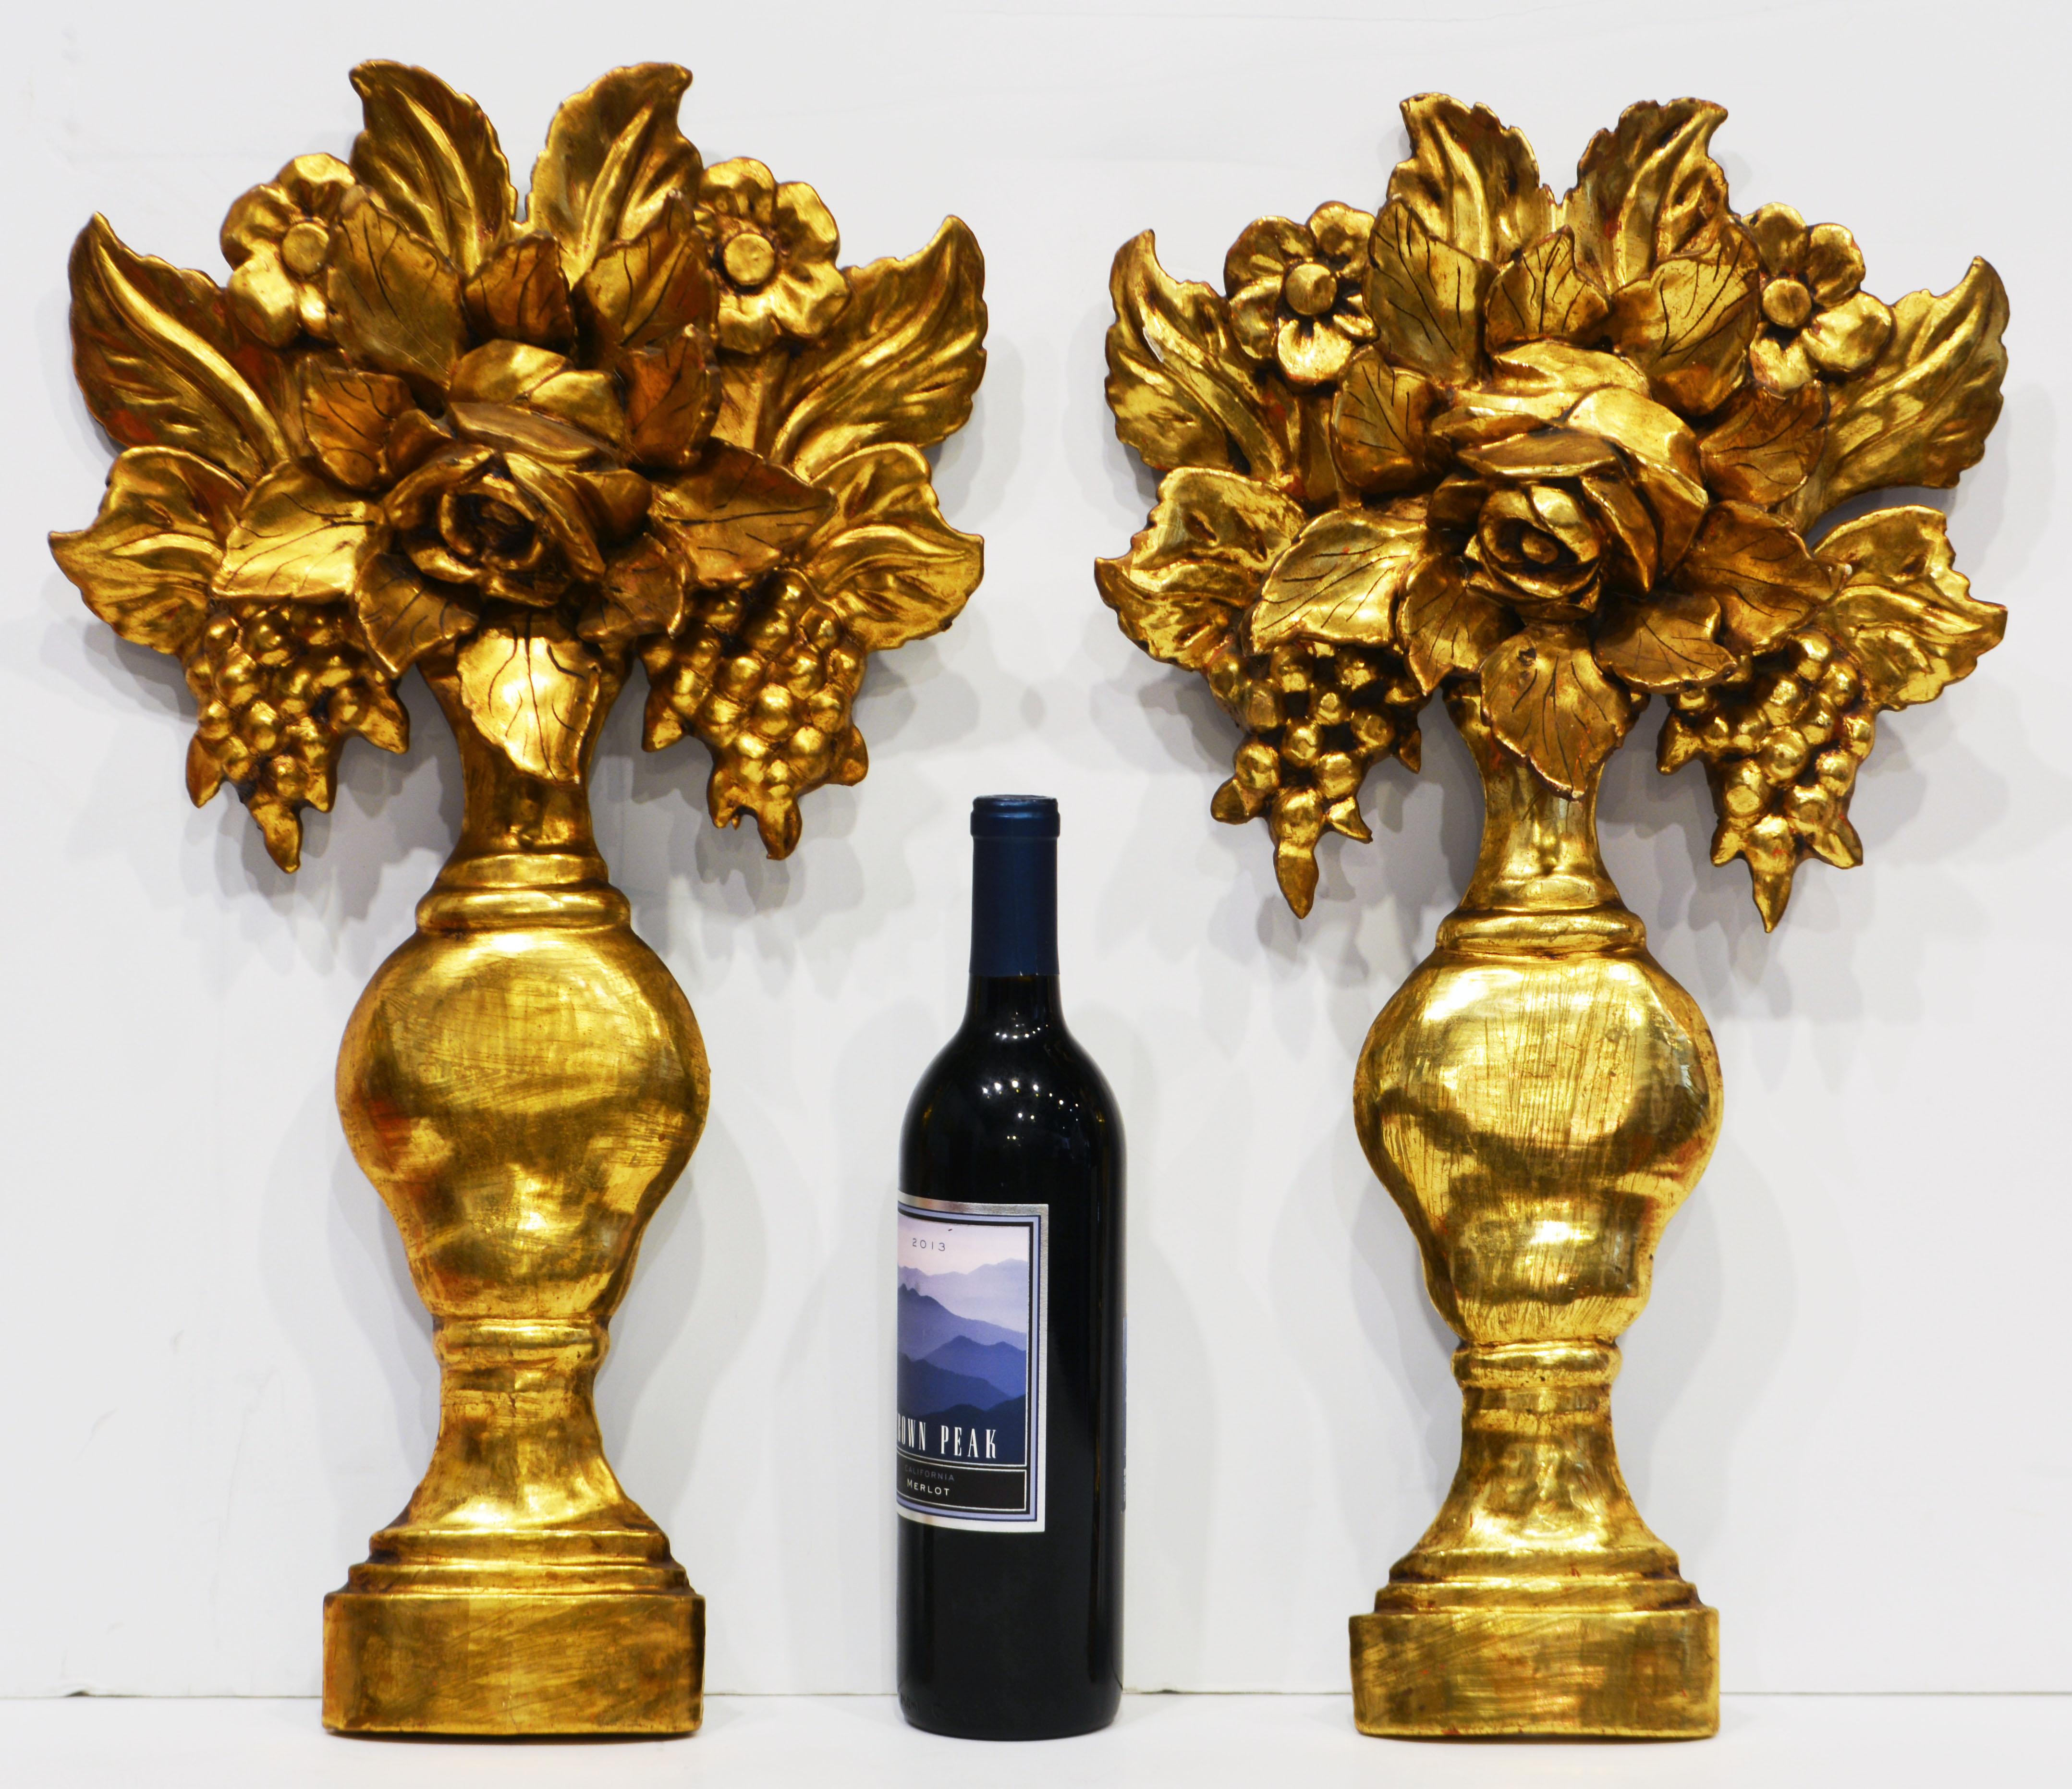 This pair of vintage mid century giltwood wall decorations are carved in the shape of classical urns holding bouquets of flowers, grapes and leaves.